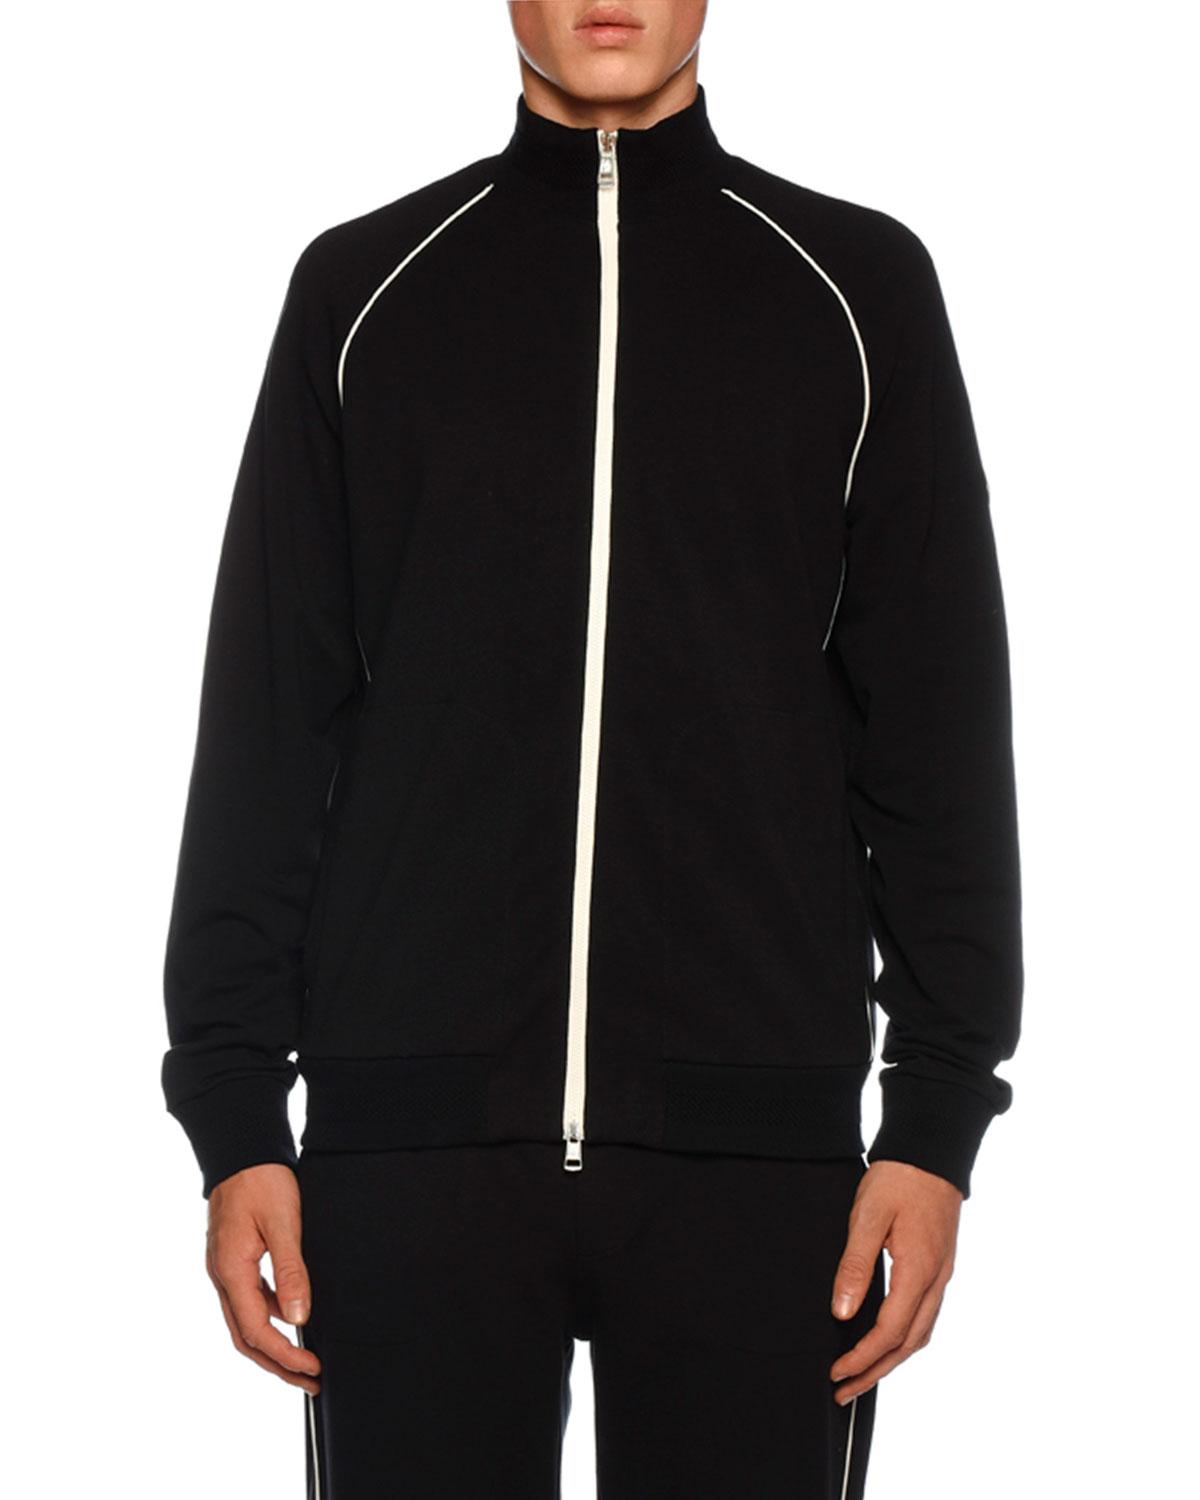 Moncler Cotton Men's Piped Track Jacket in Navy (Blue) for Men - Lyst